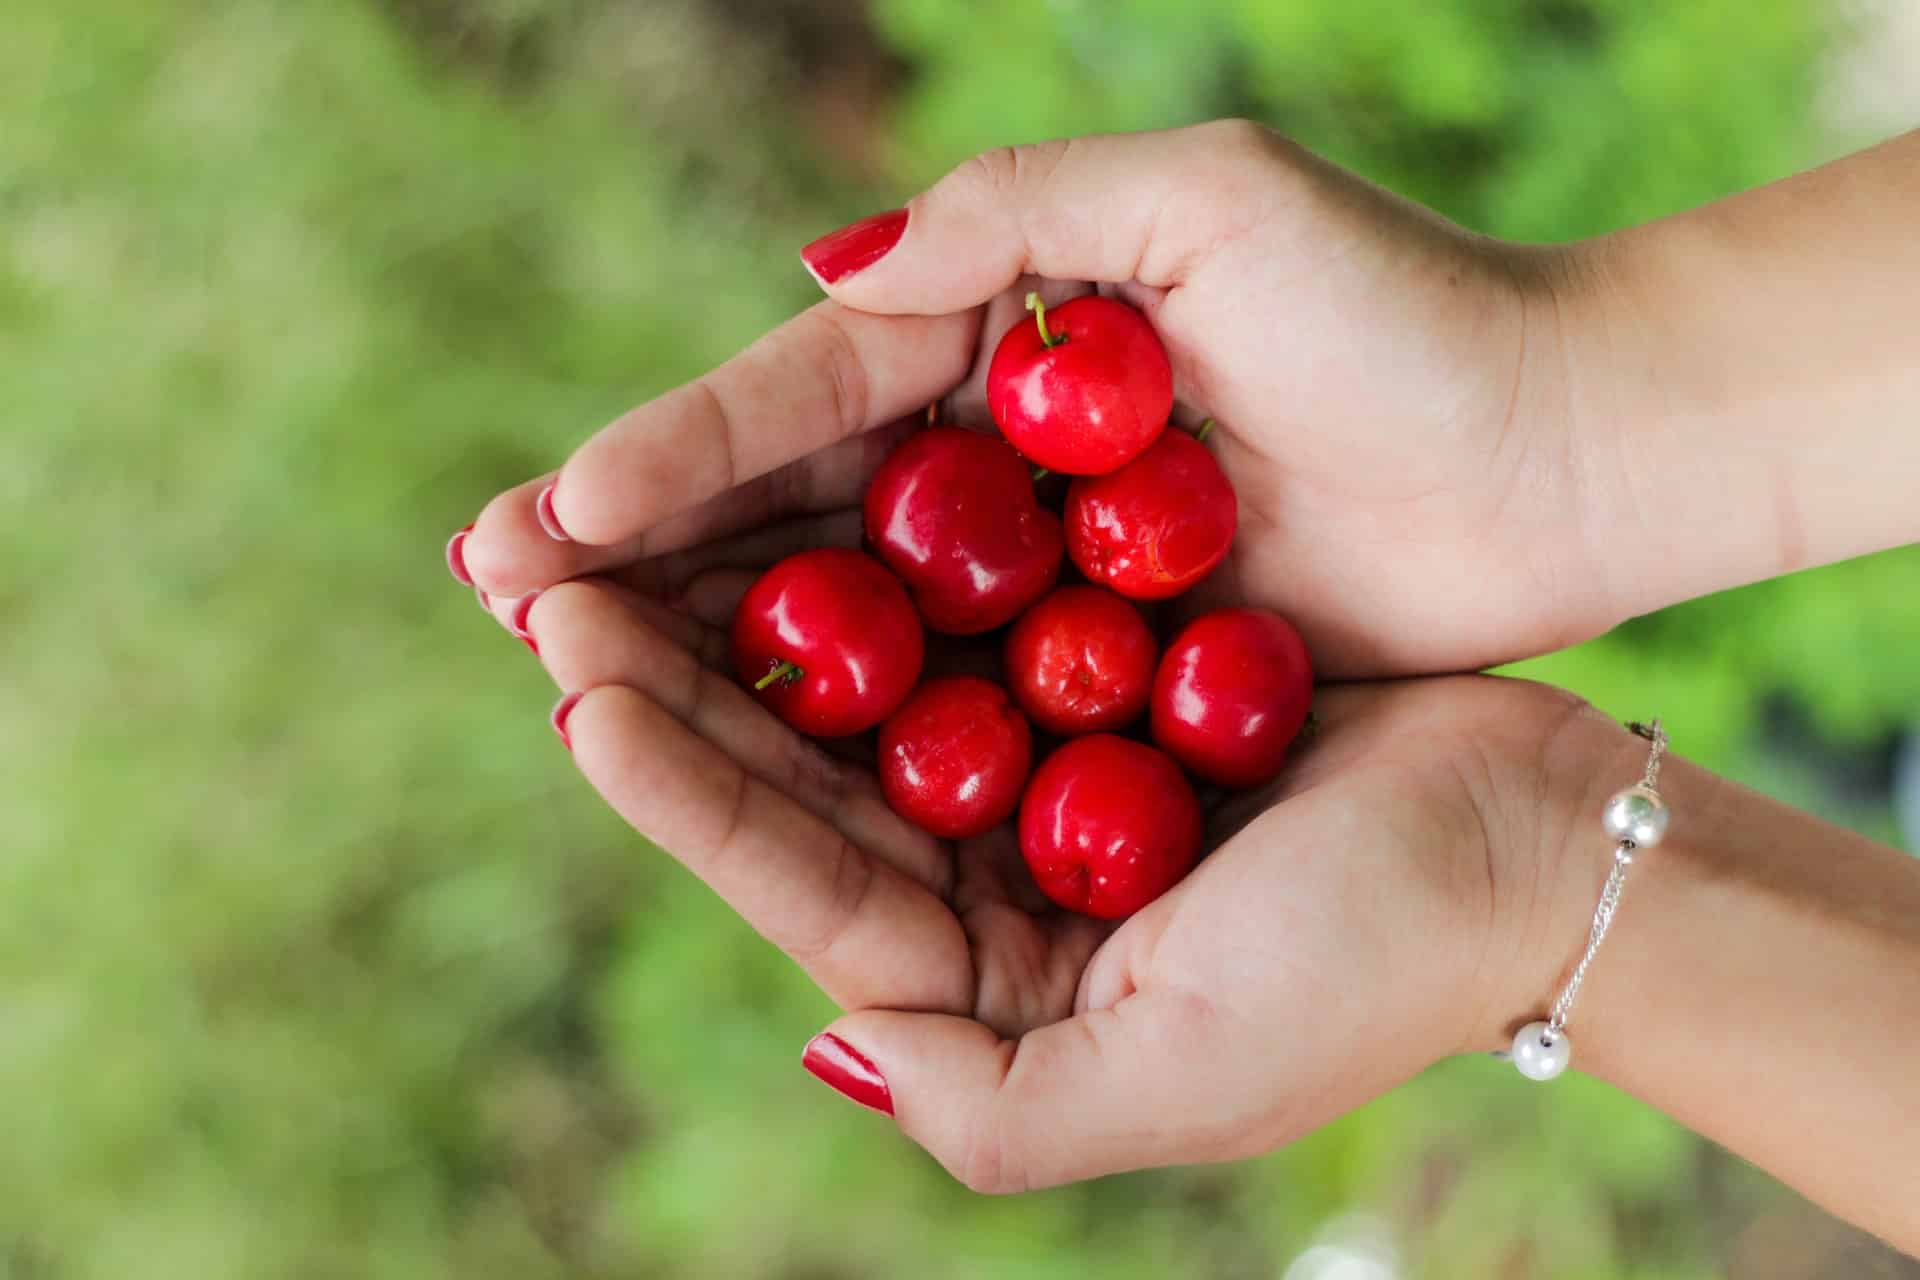 cherries in someone’s cupped hands